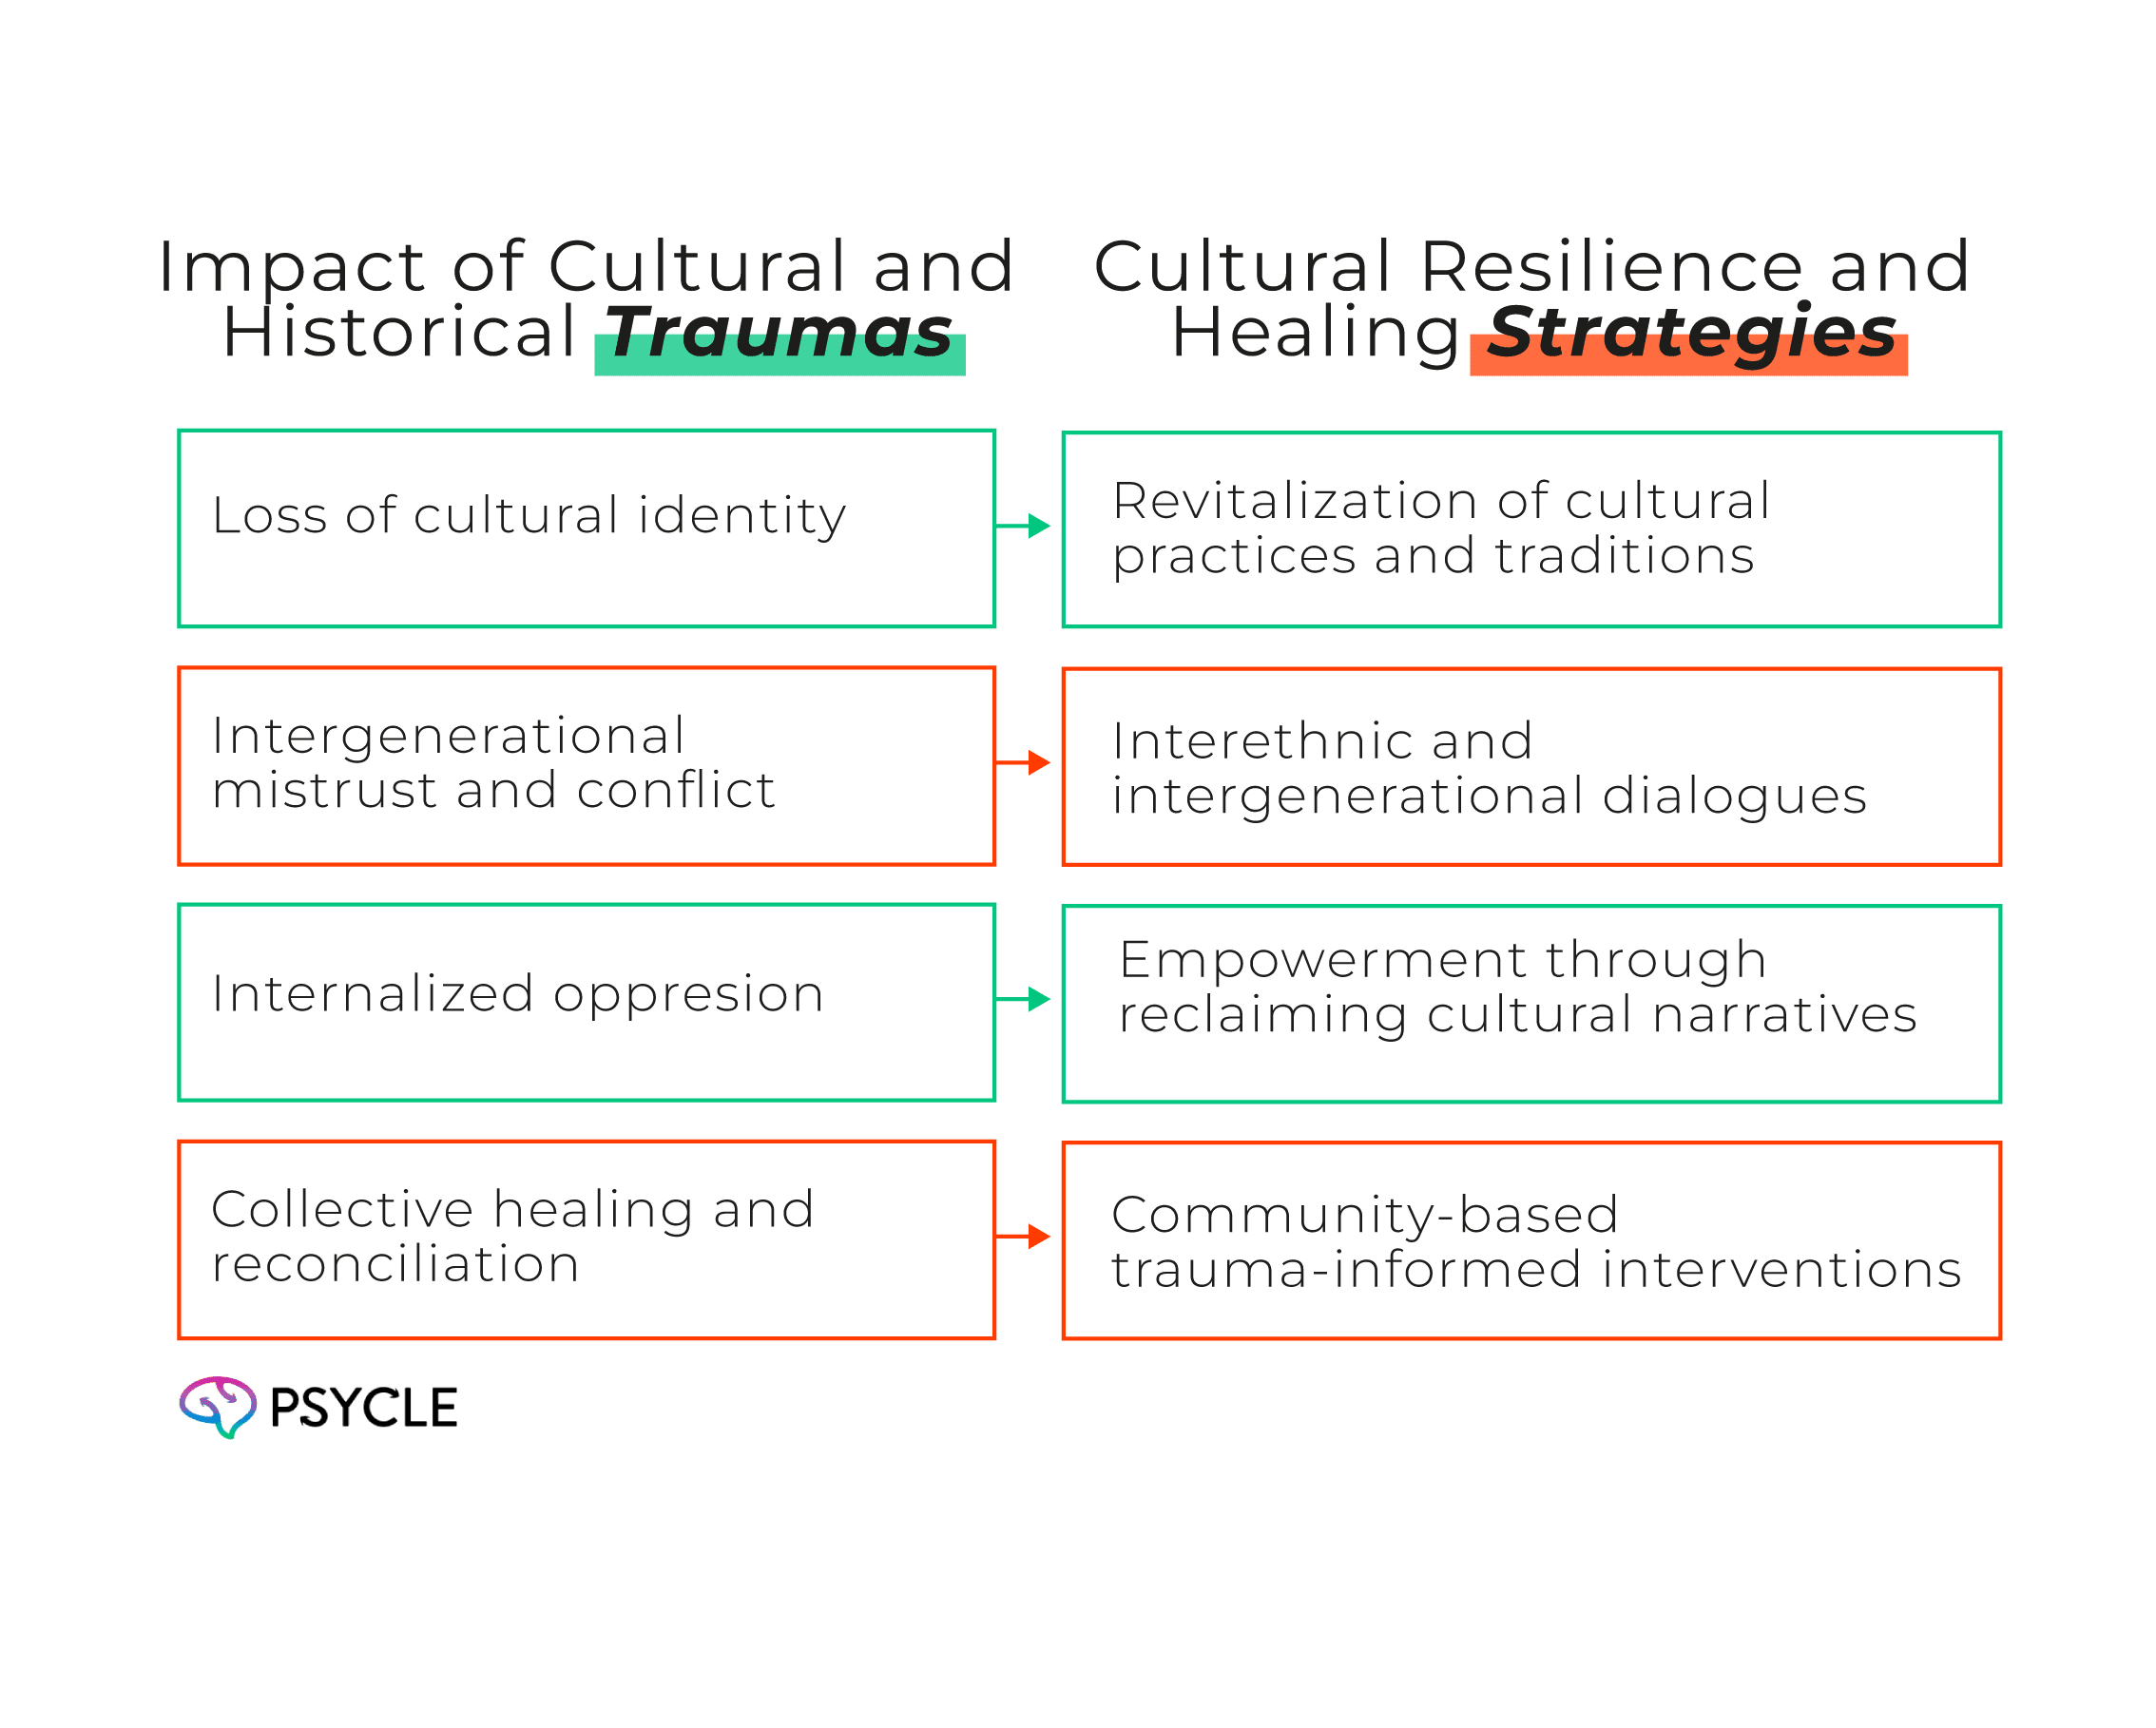 Table comparing the impact of cultural and historial traumas with the sultural resilience and healing strategies.